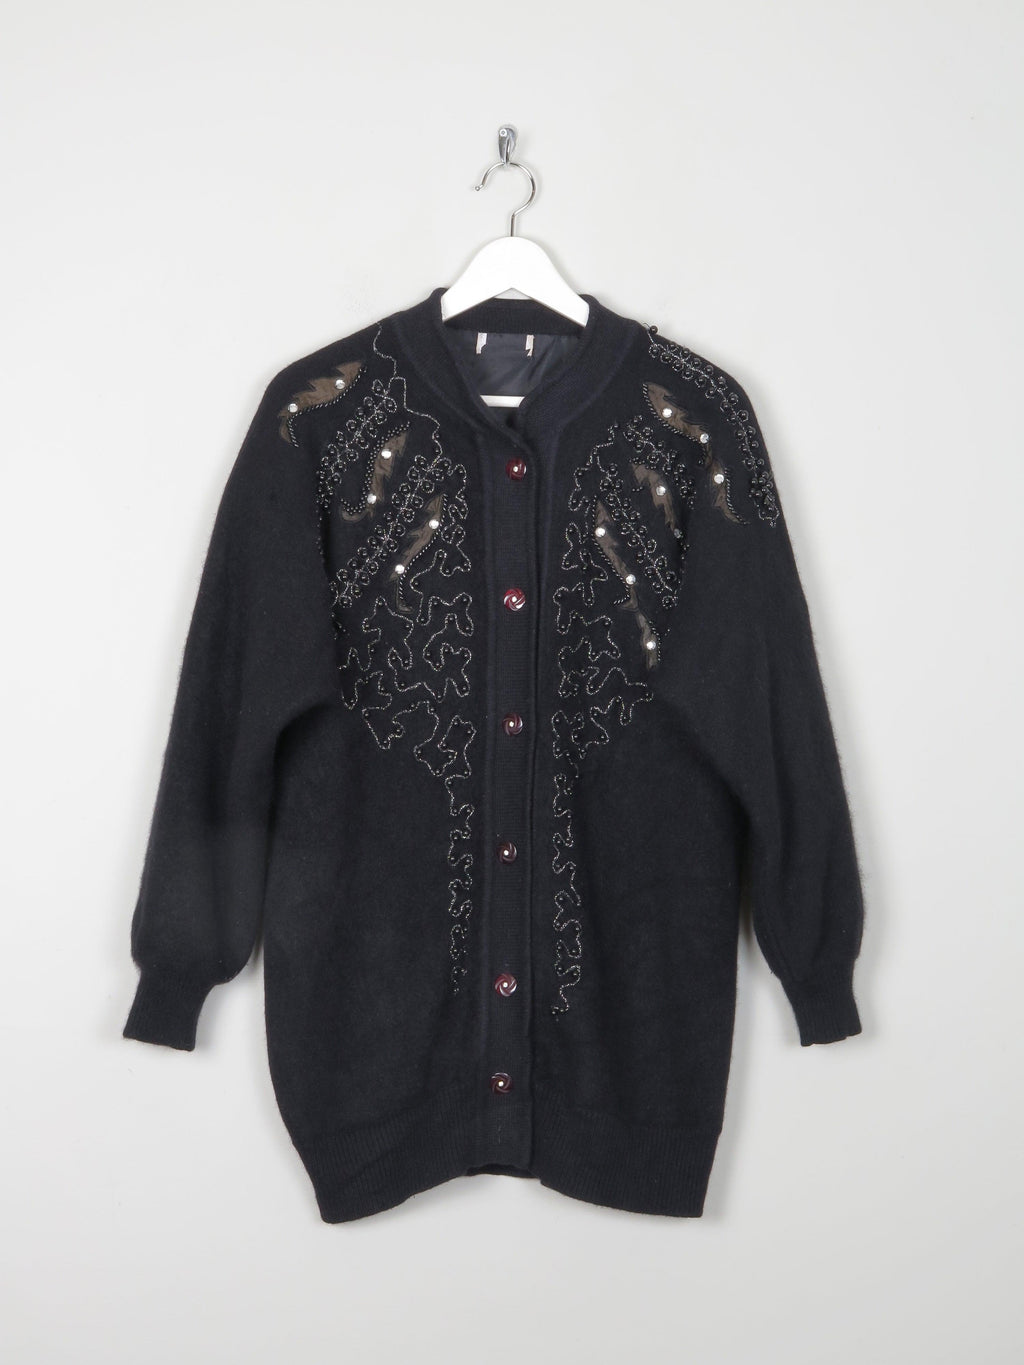 Women's Black Wool Cardigan With Beads & Lurex Trims S/M - The Harlequin